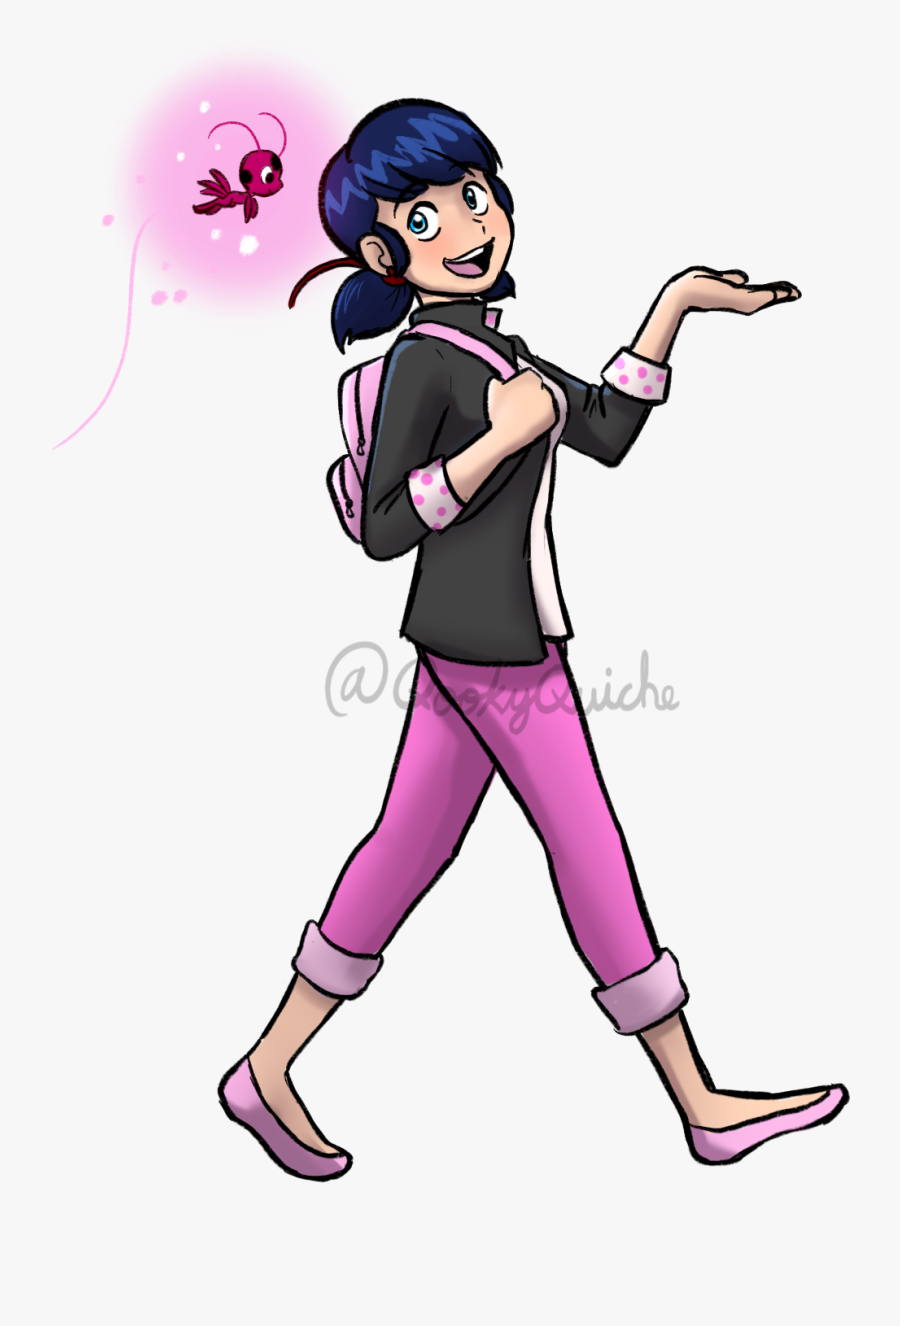 Quiche-draws:
“ Wow. Didn’t Realize I Hadn’t Uploaded - Cartoon, Transparent Clipart